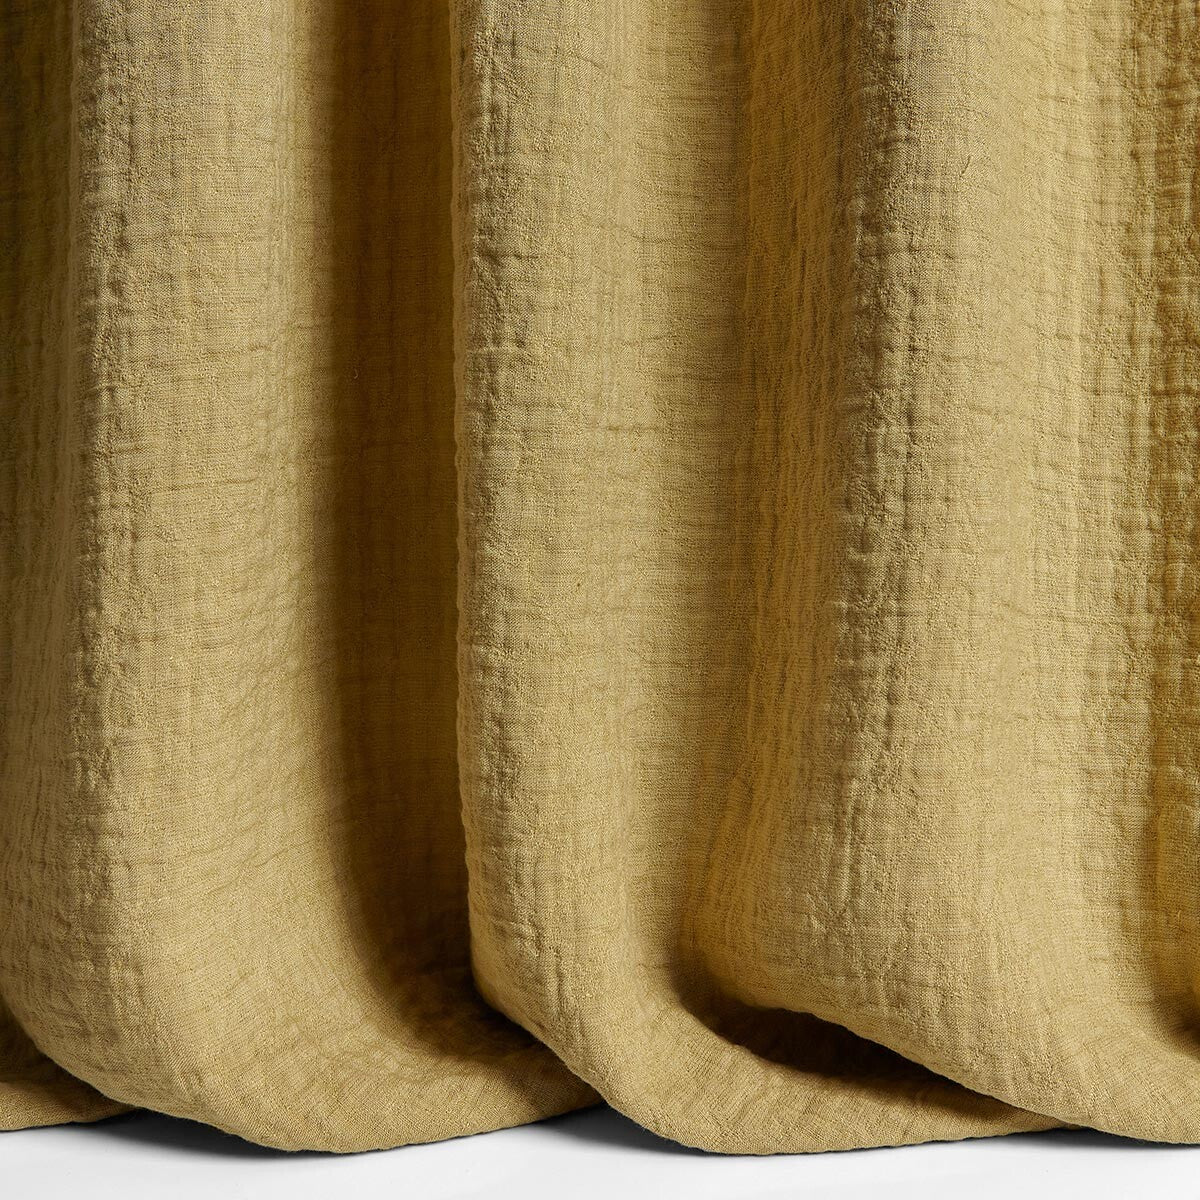 Crotchet fabric in 5 color - pattern LZ-30405.05.0 - by Kravet Couture in the Lizzo collection